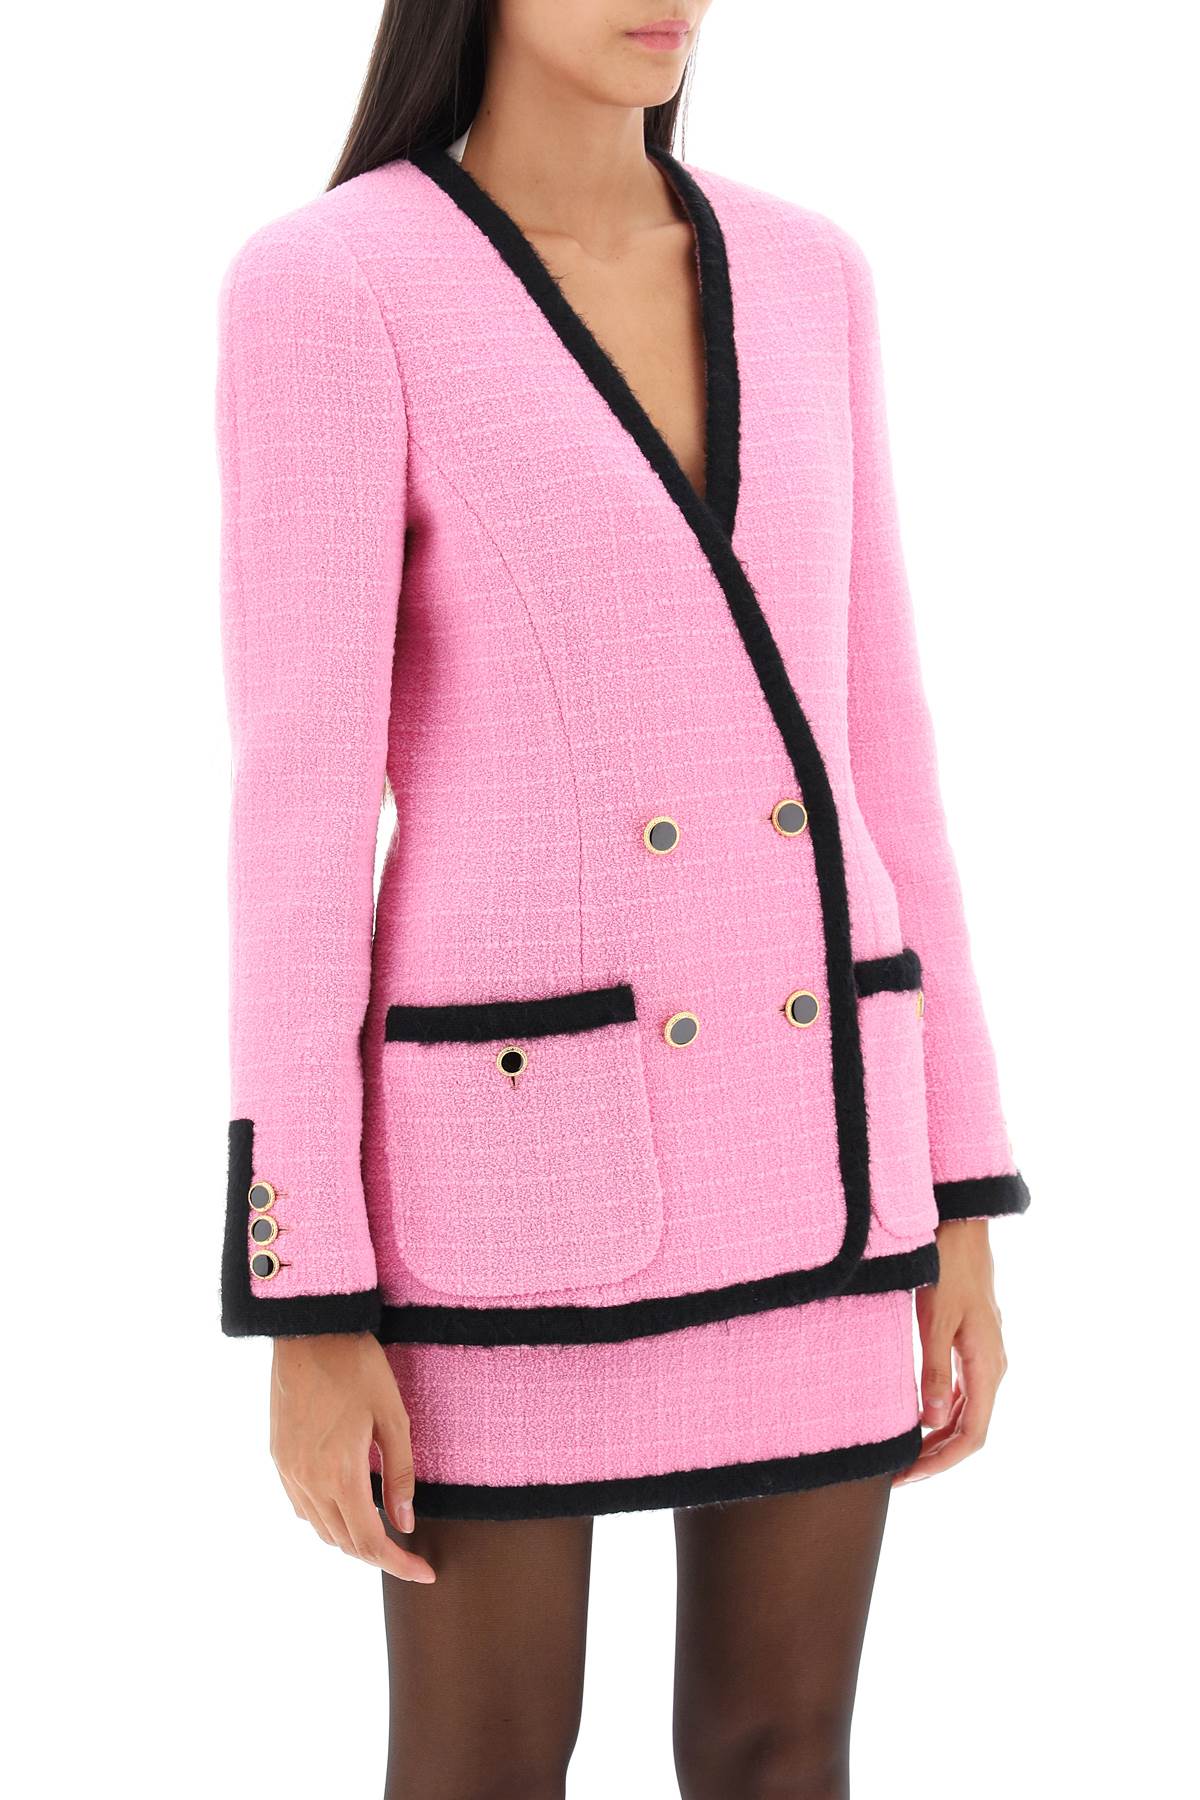 Alessandra rich double-breasted boucle tweed jacket-women > clothing > jackets > blazers and vests-Alessandra Rich-40-Pink-Urbanheer